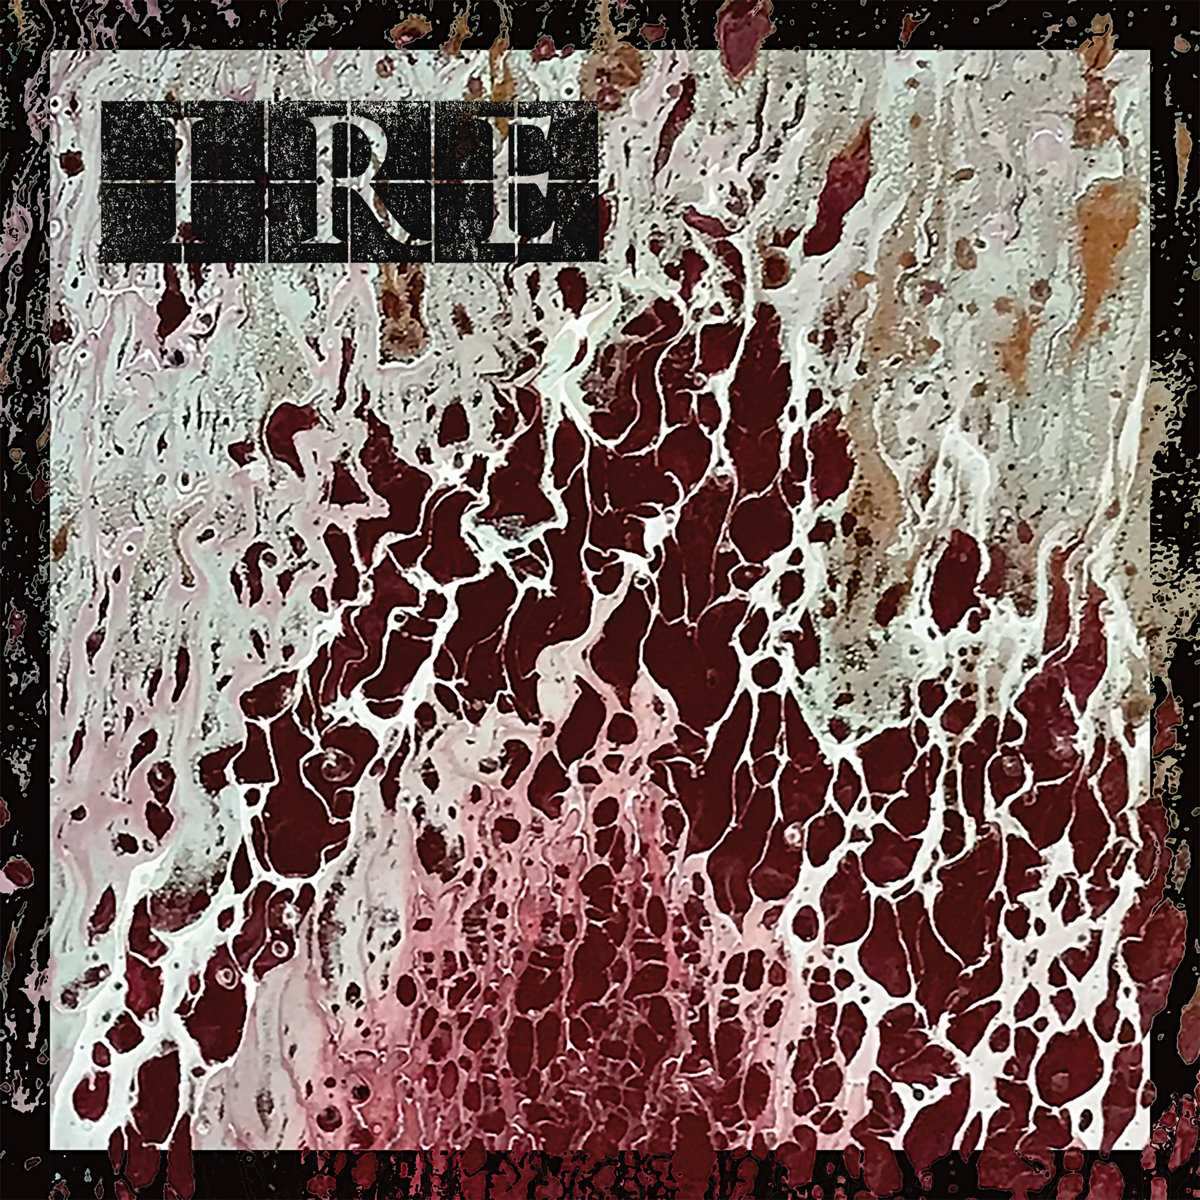 The IRE cover